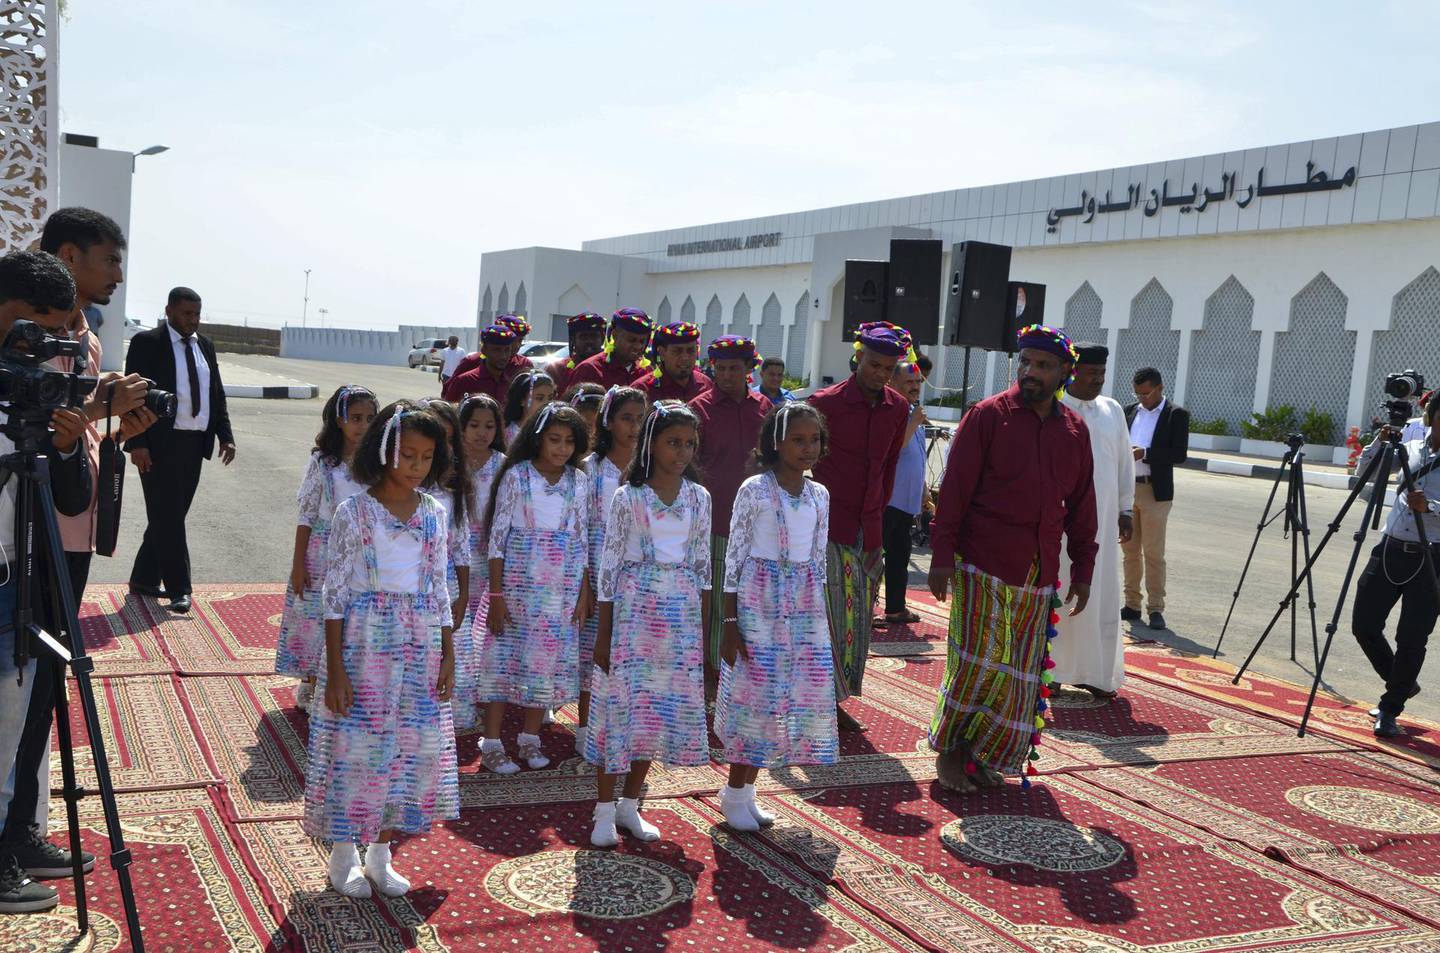 Local singers and dancers perform traditional Yemeni folklore in celebration of the opening of the airport. Saeed Al-Batati for The National.

